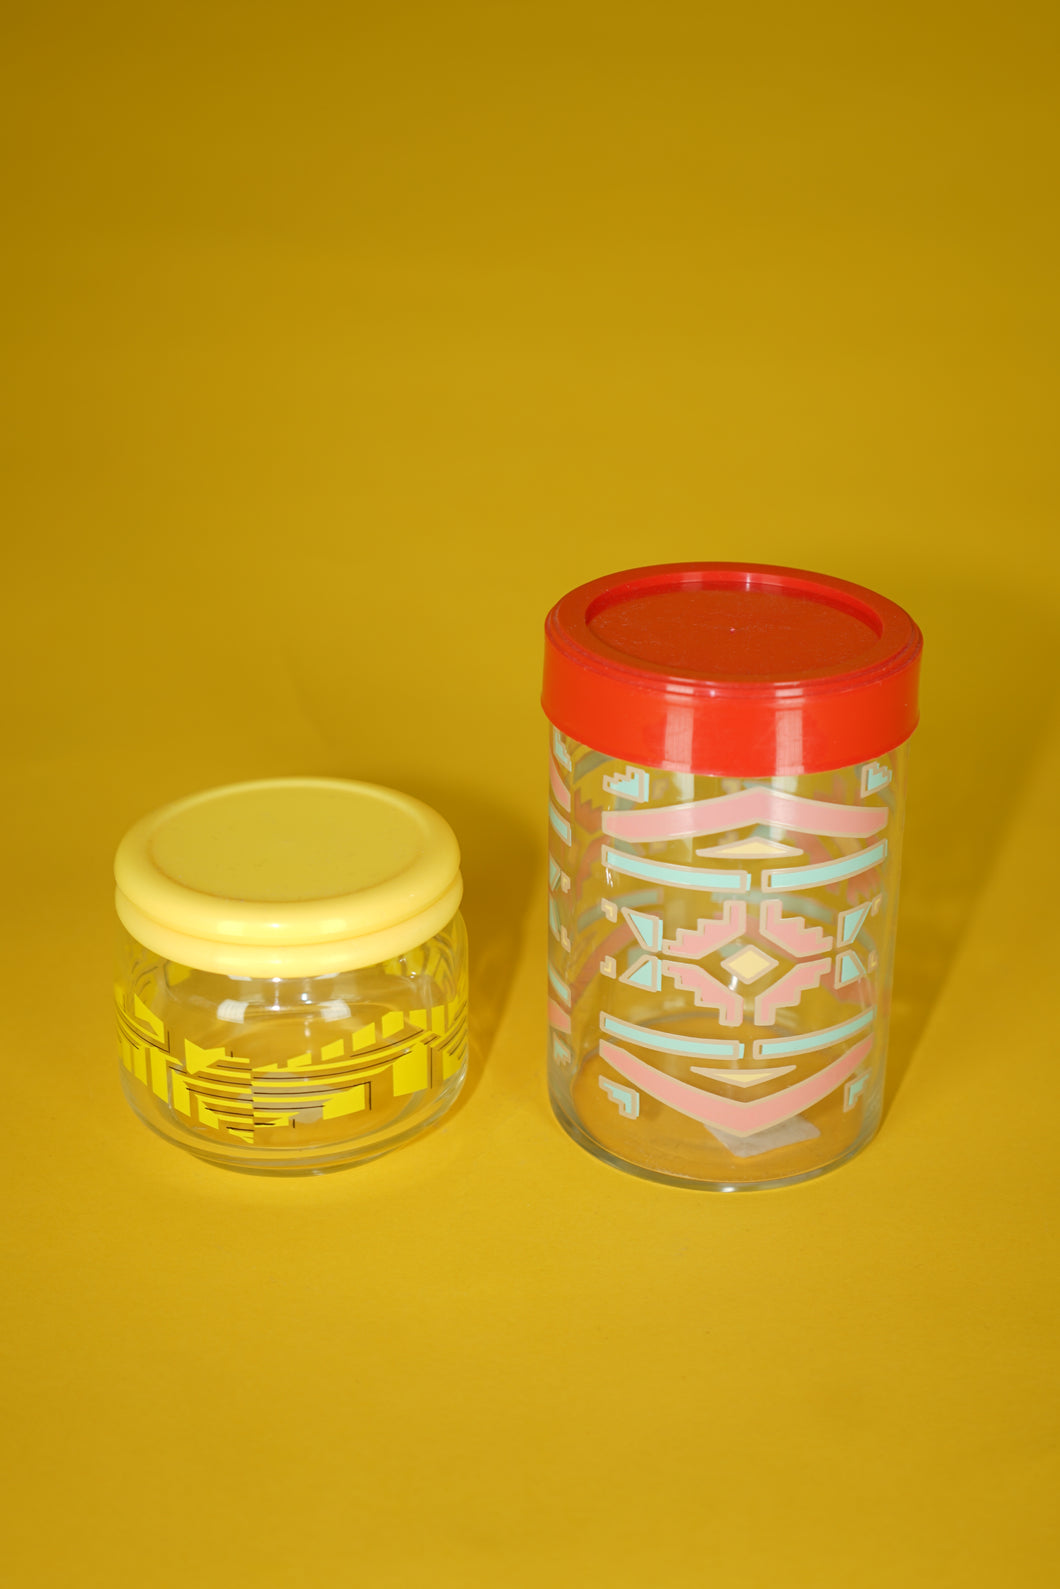 Small vintage glass container in yellow with patterns